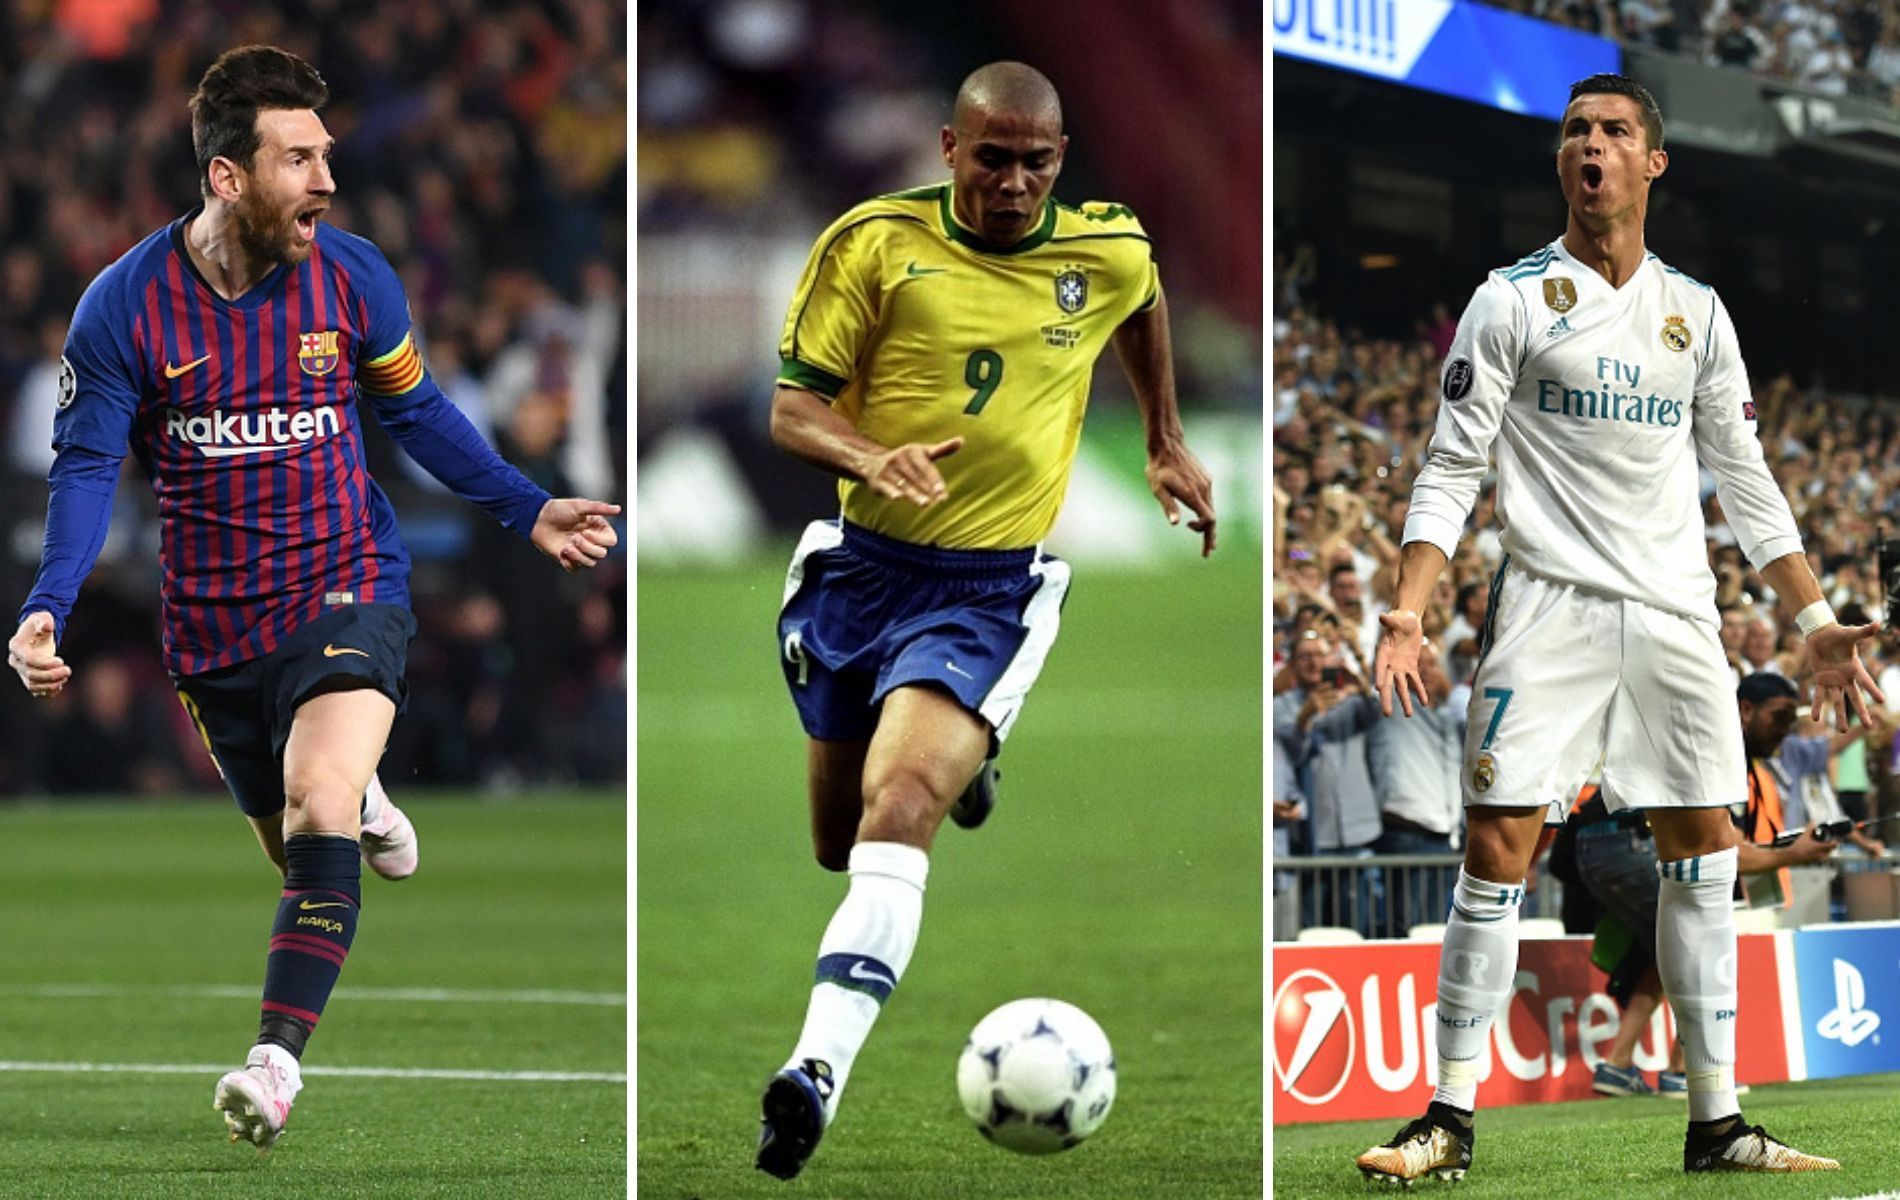 Ranking the greatest attackers of all-time.